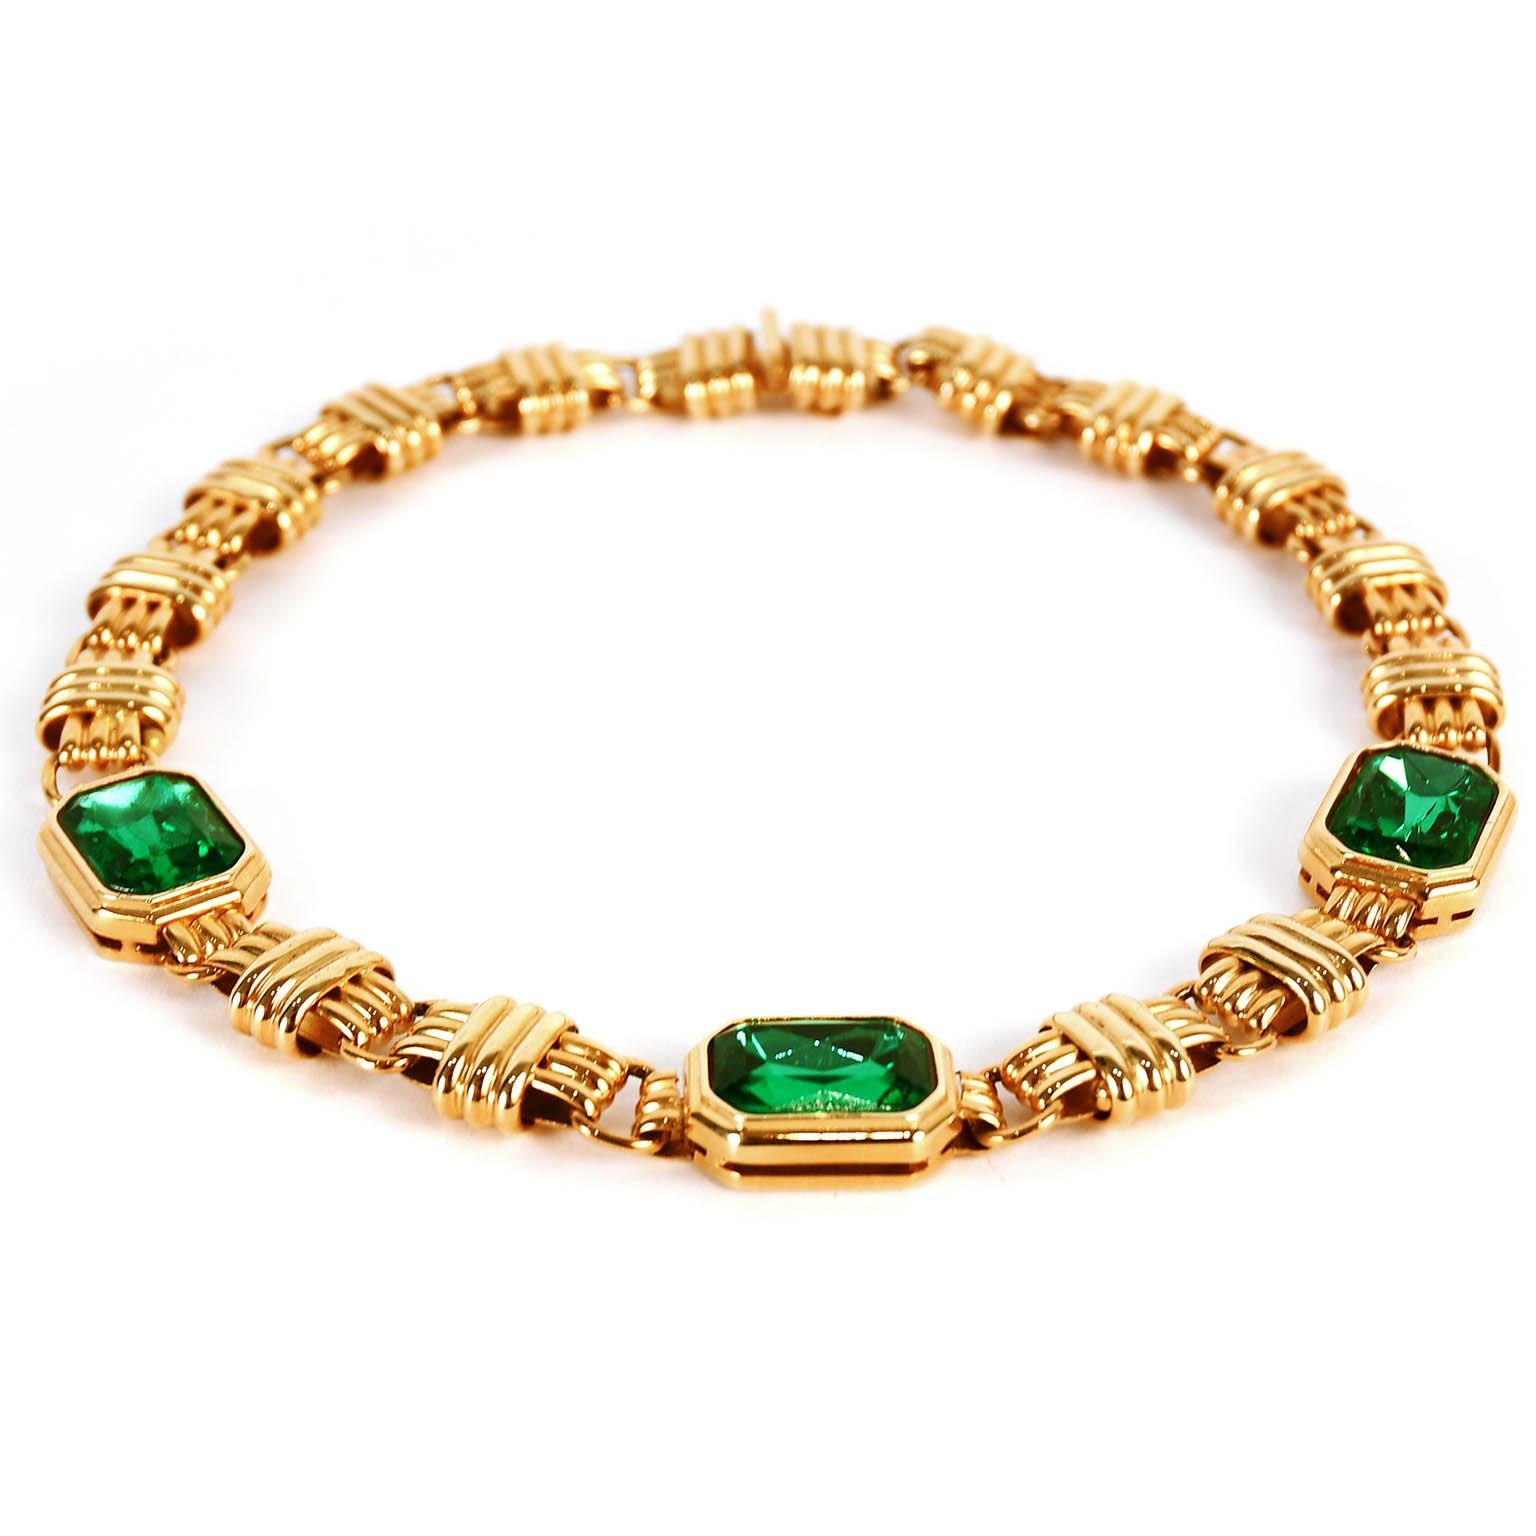 A marvelous necklace from 1970-1980 designed by company Bijoux Cascio.

1948 Gaetana Cascio founded the company and since then all pieces were produced directly in Florence
Riccardo Cascio joined his father Gaetano's company in the 1960s.
Since